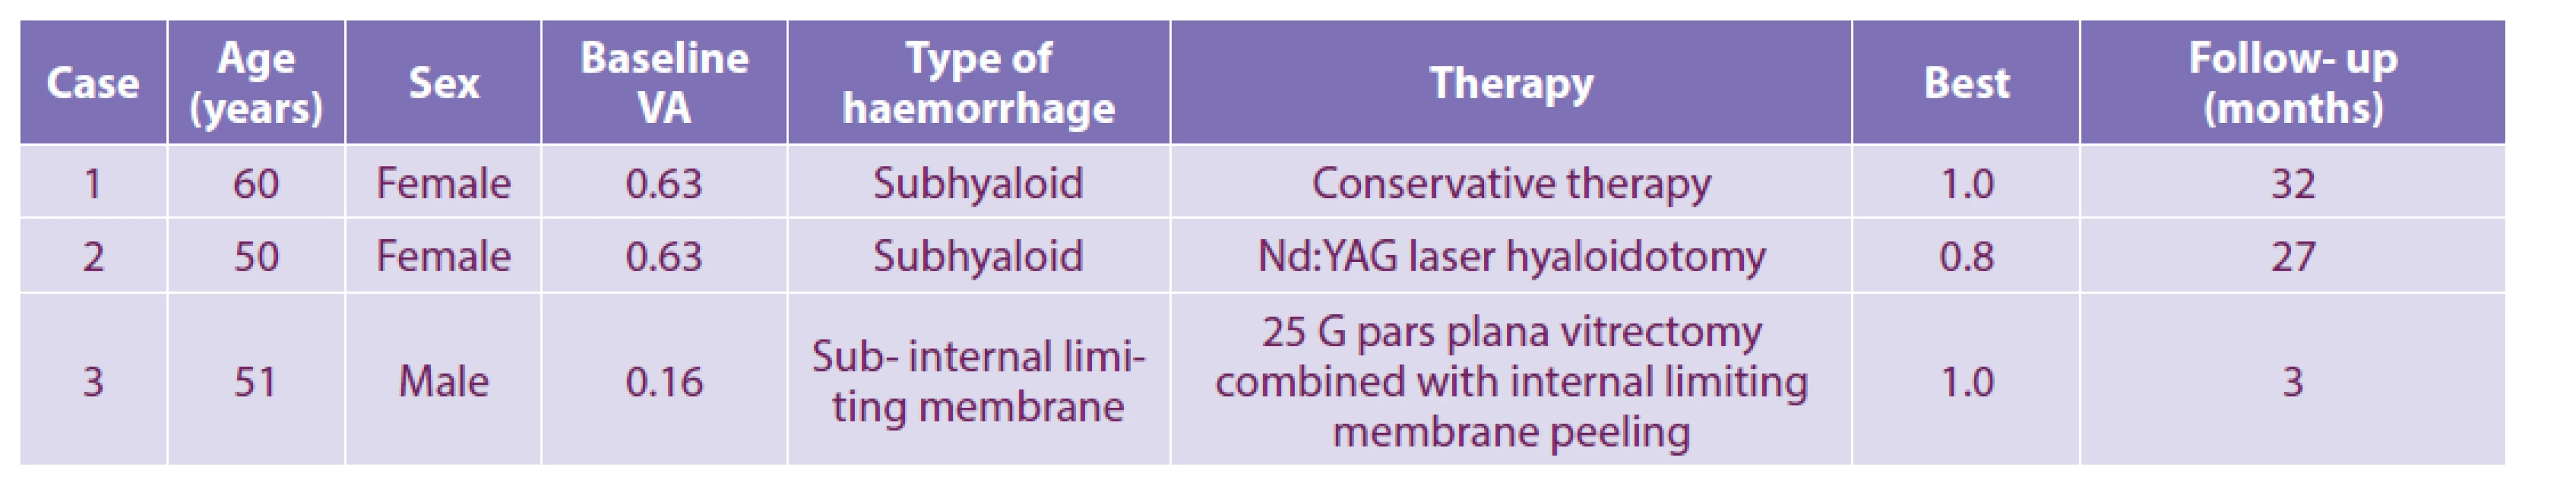 Results of various treatments for premacular bleeding and bleeding below the inner limiting membrane